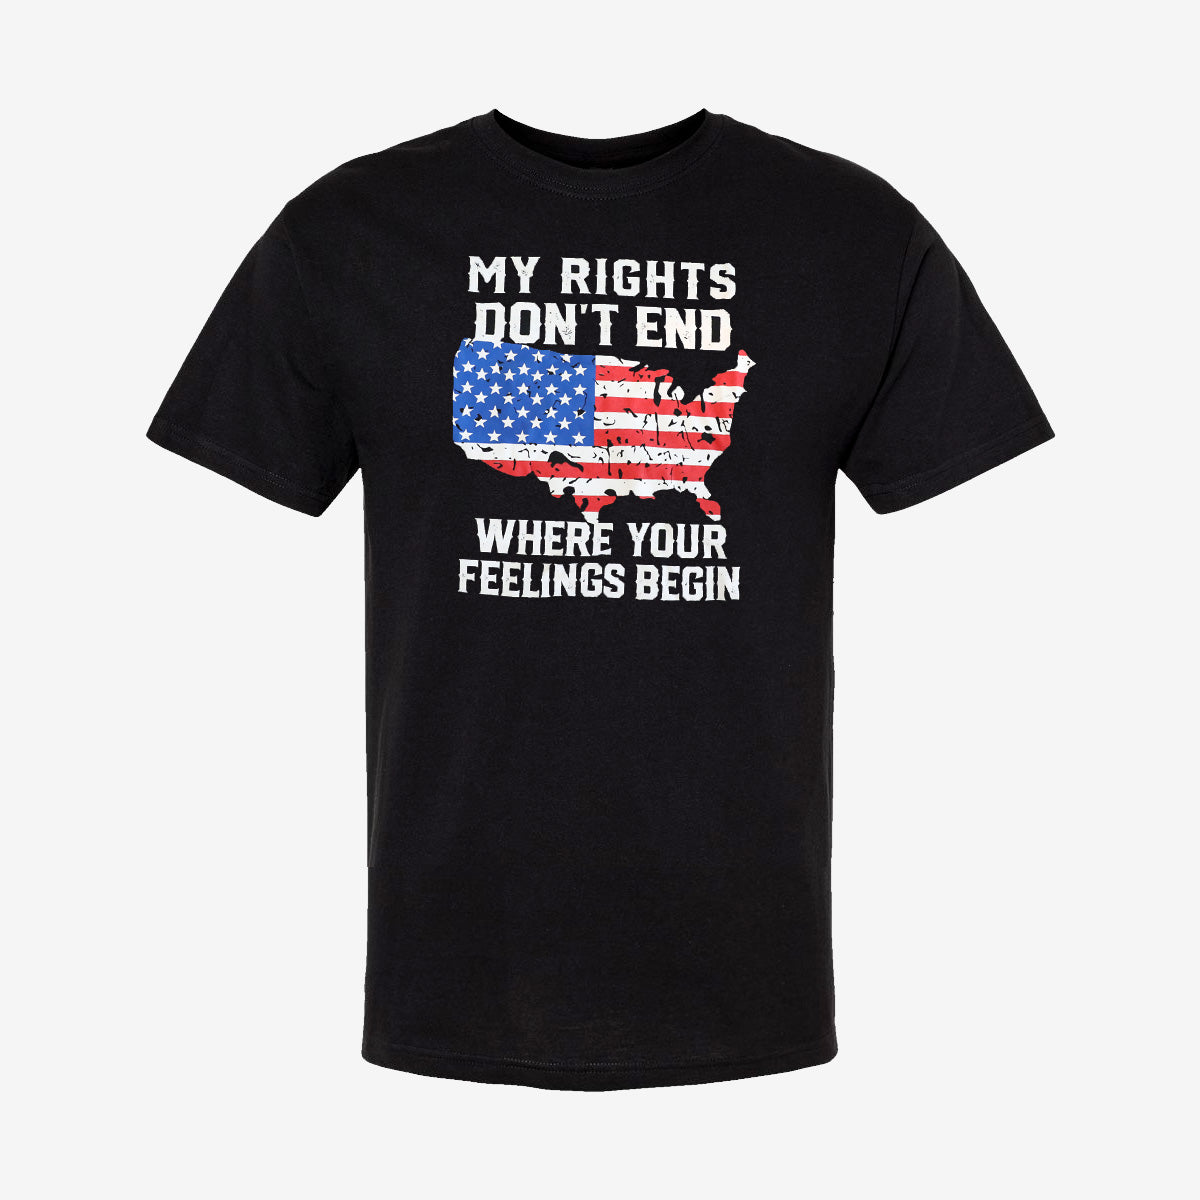 My Rights Don't End T-Shirt